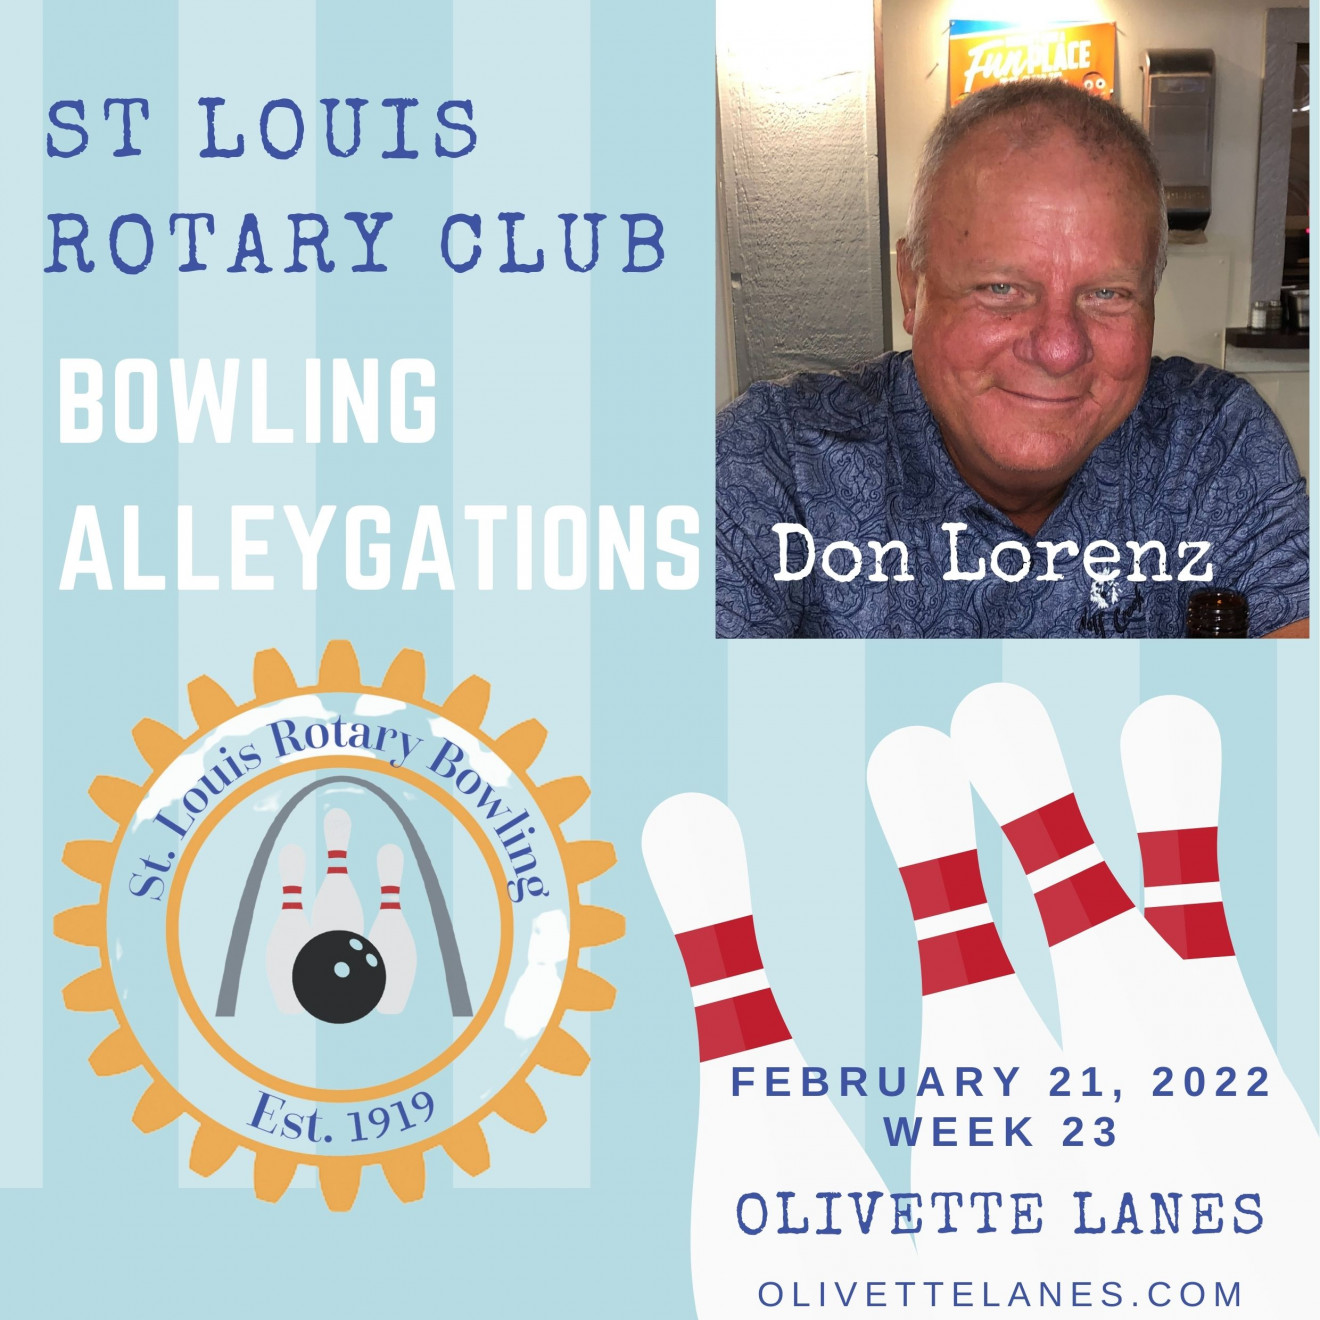 Don Lorenz Wk 23 Bowling Alleygations